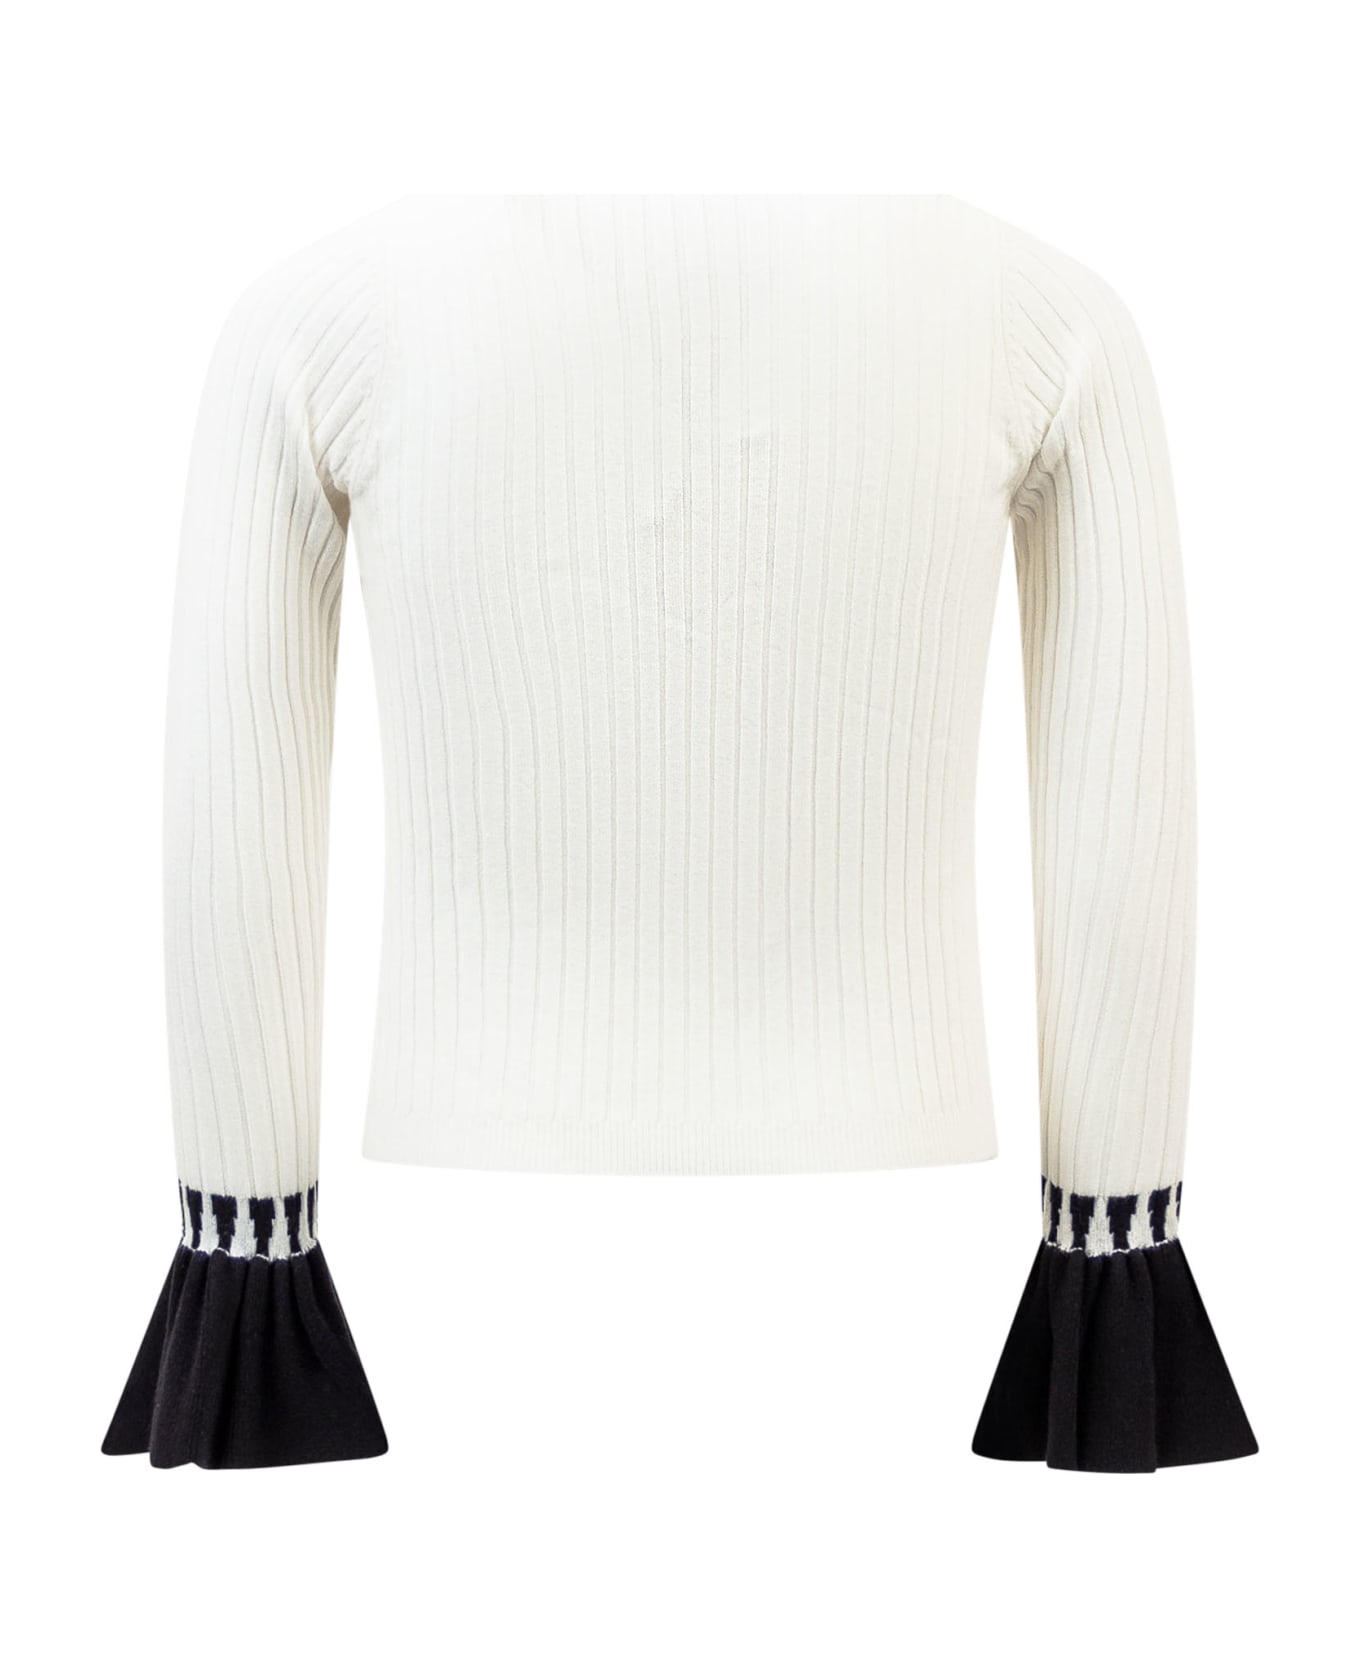 TwinSet Sweater With Logo - OFF WHITE/NERO